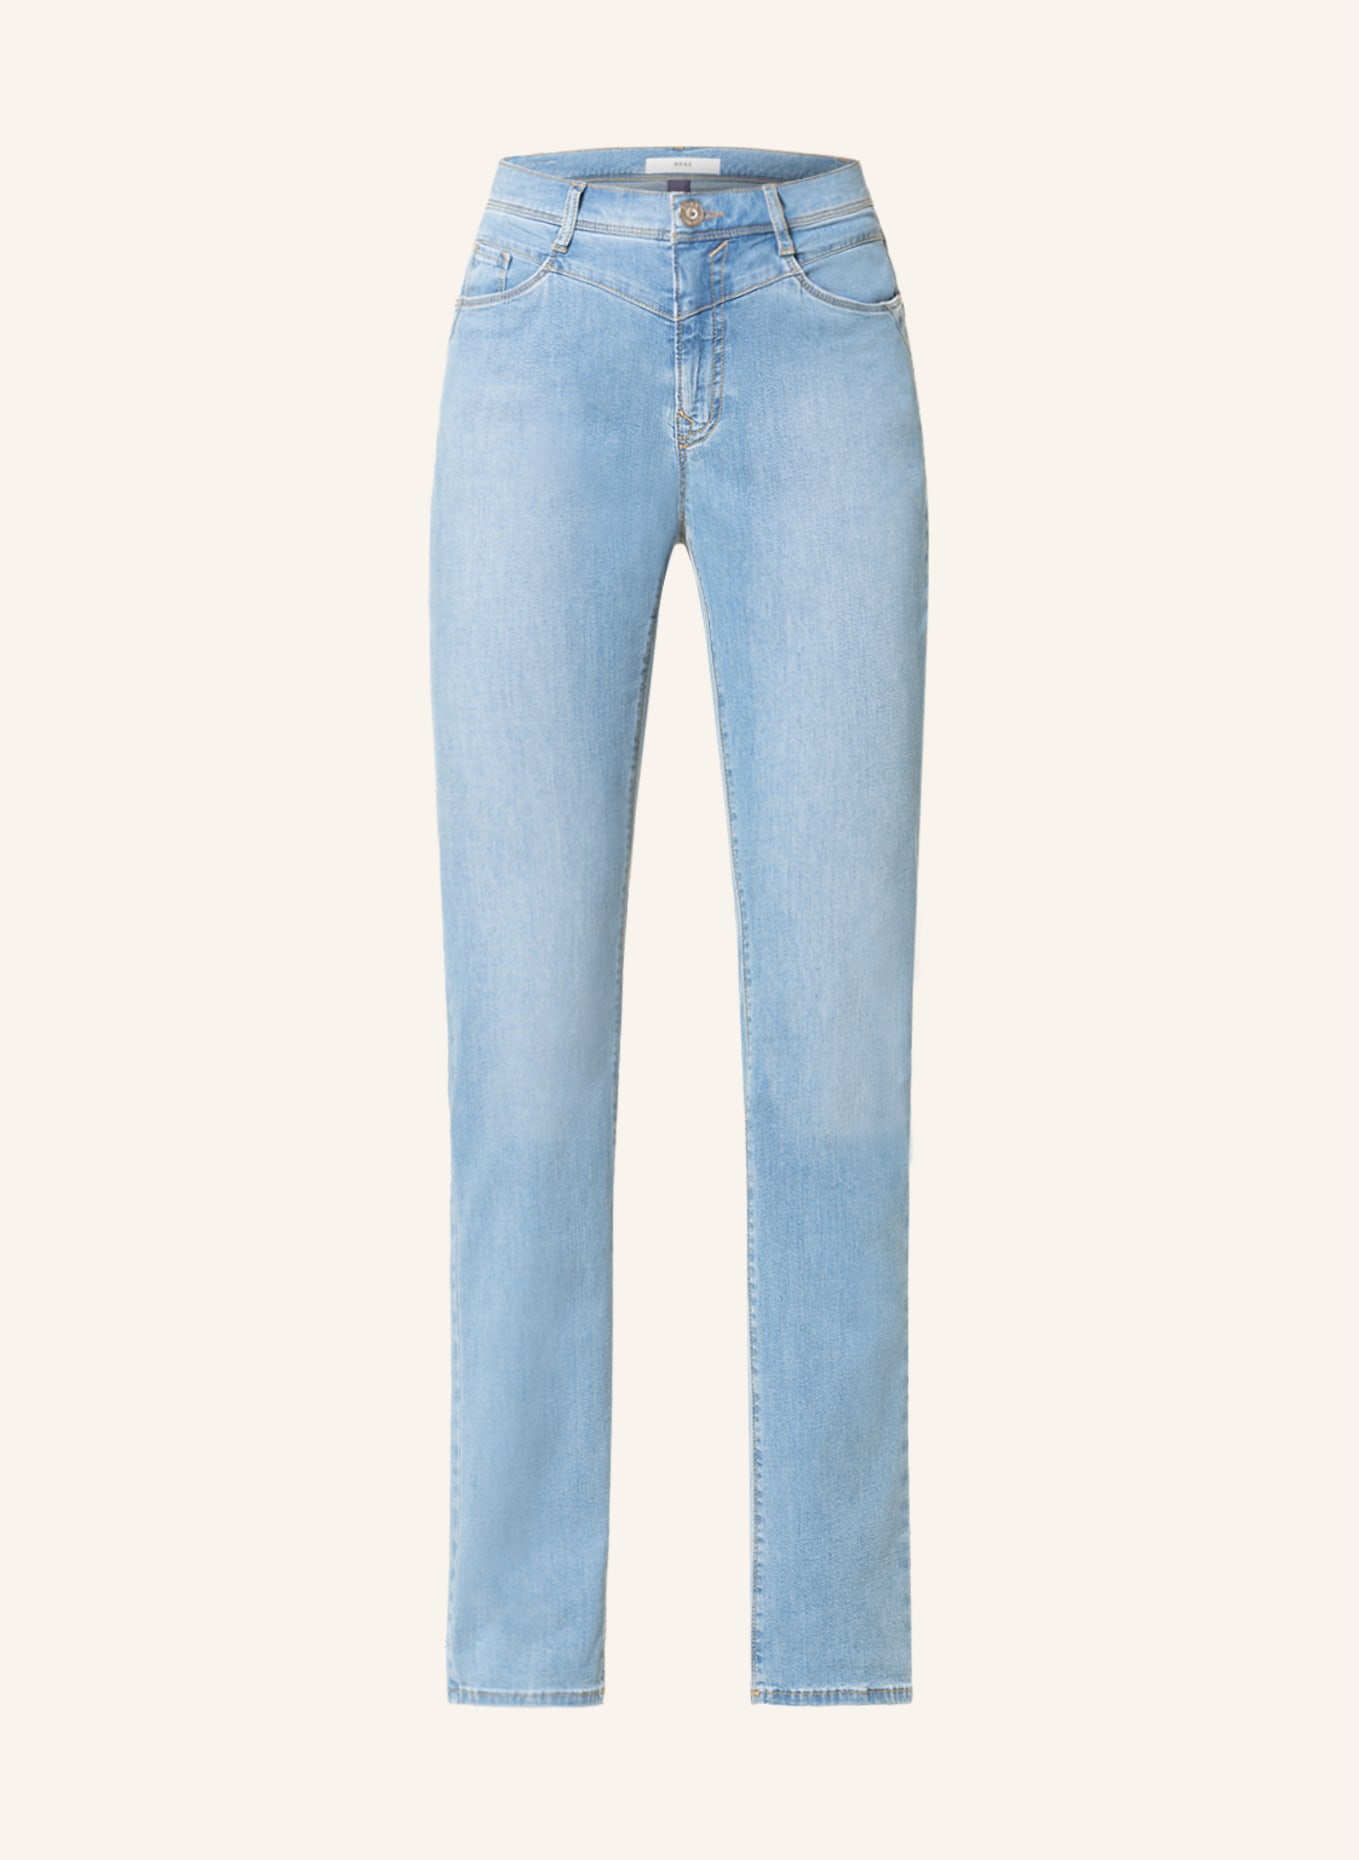 BRAX Jeans MARY in 19 used light blue | Skinny Jeans